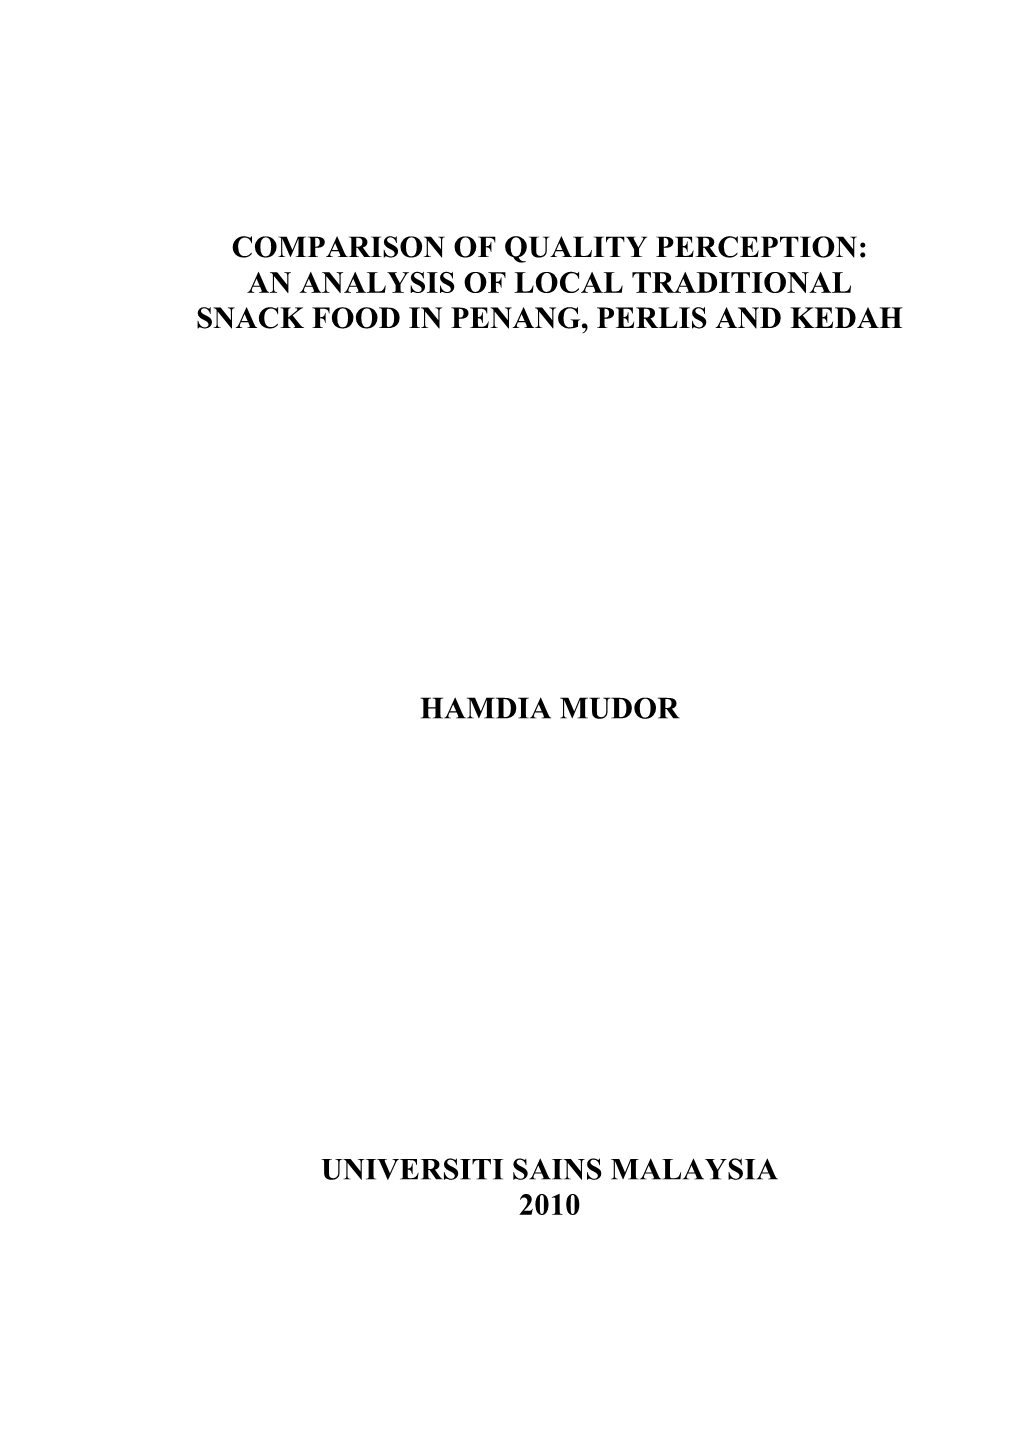 Comparison of Quality Perception: an Analysis of Local Traditional Snack Food in Penang, Perlis and Kedah